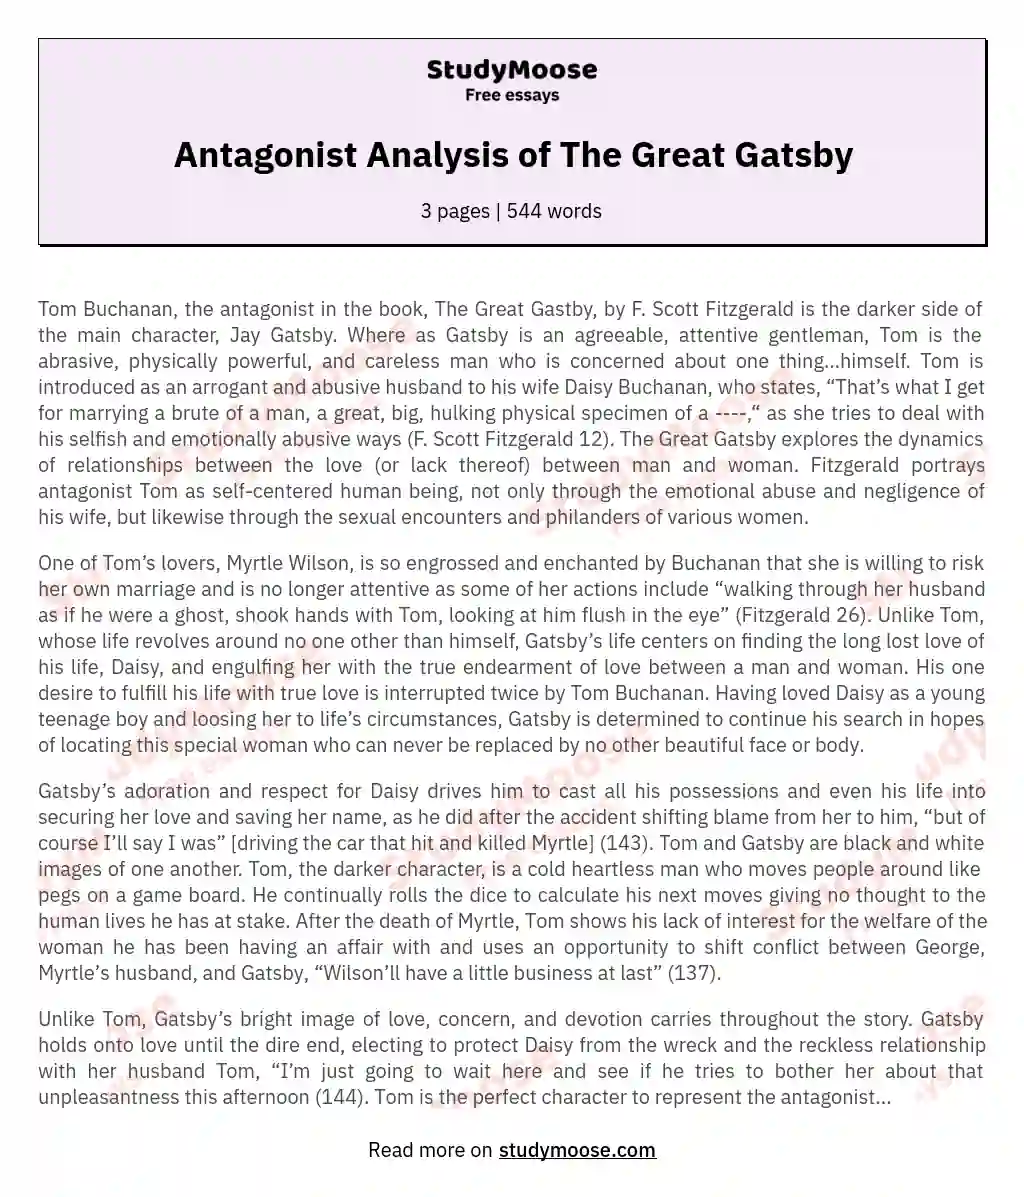 Antagonist Analysis of The Great Gatsby essay